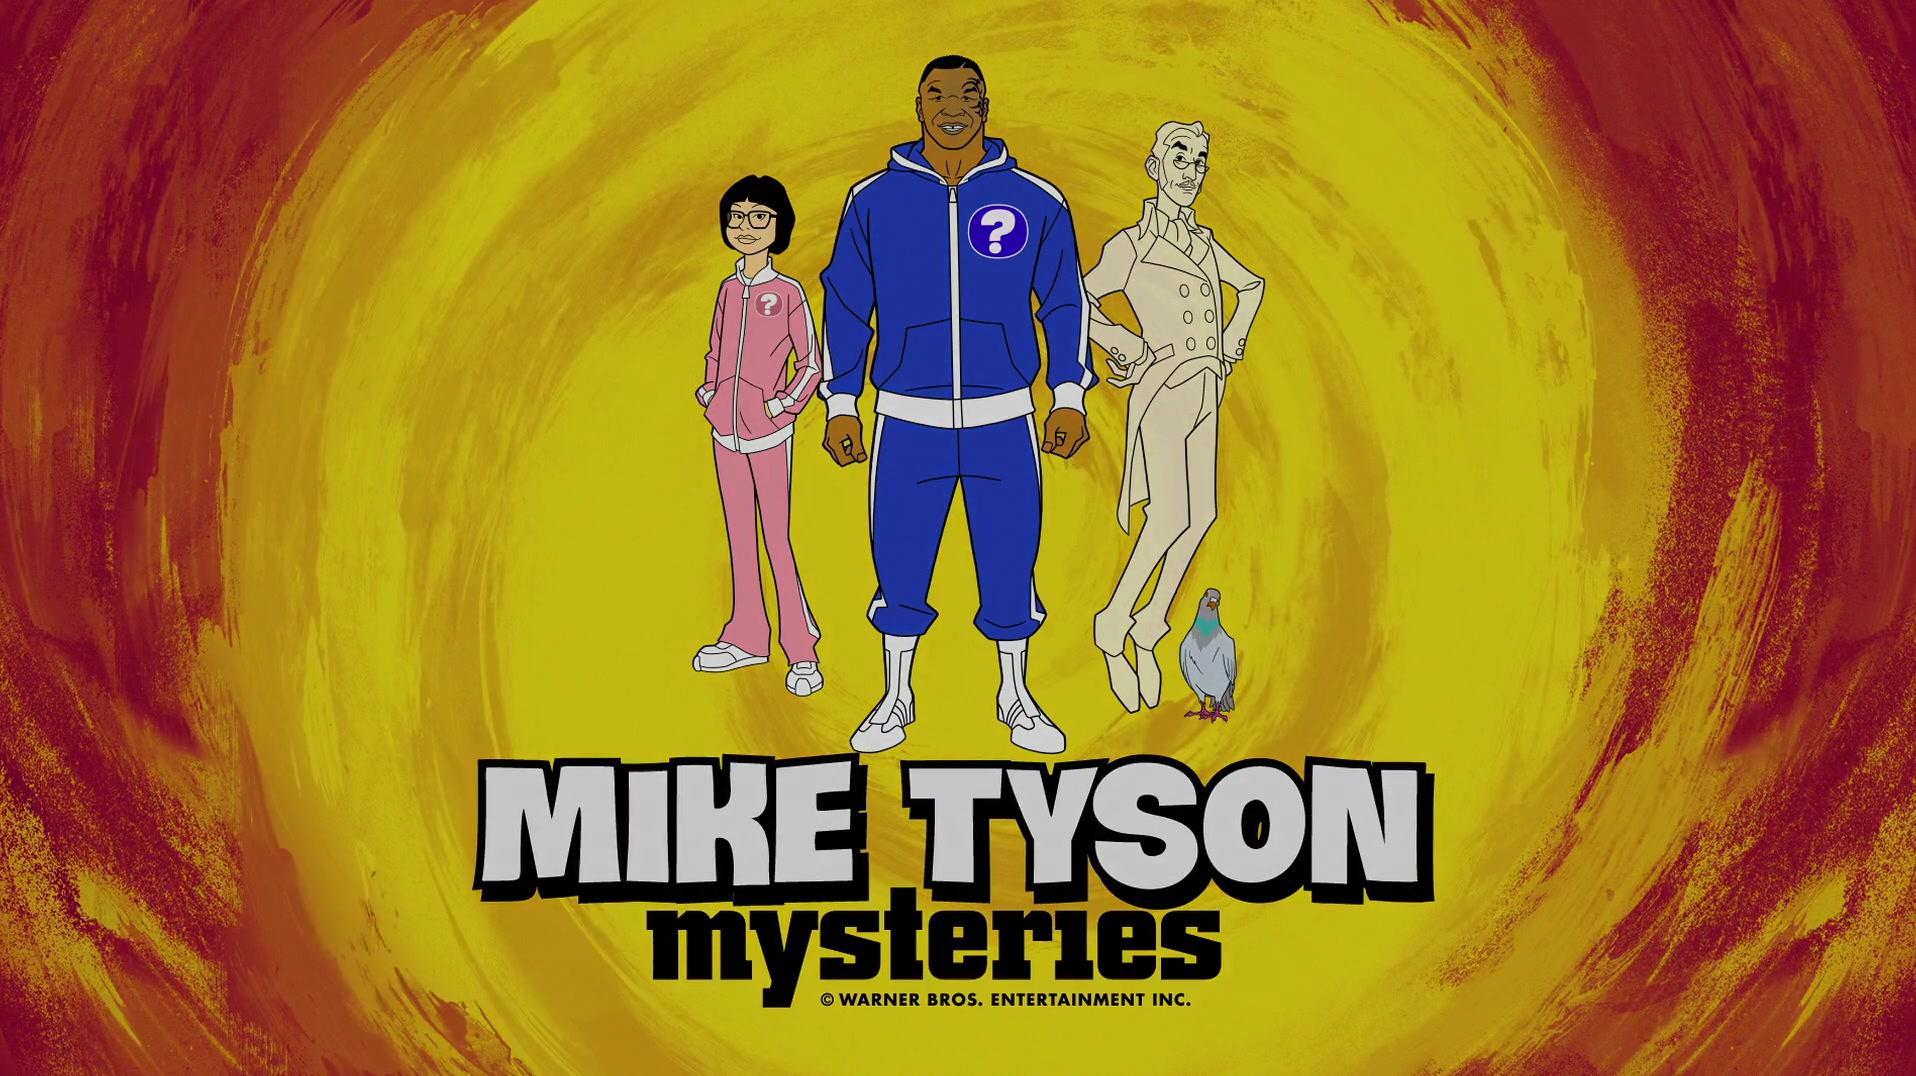 Mike Tyson Mysteries Wallpaper For Ipad, Mike Tyson Mysteries, Cartoons